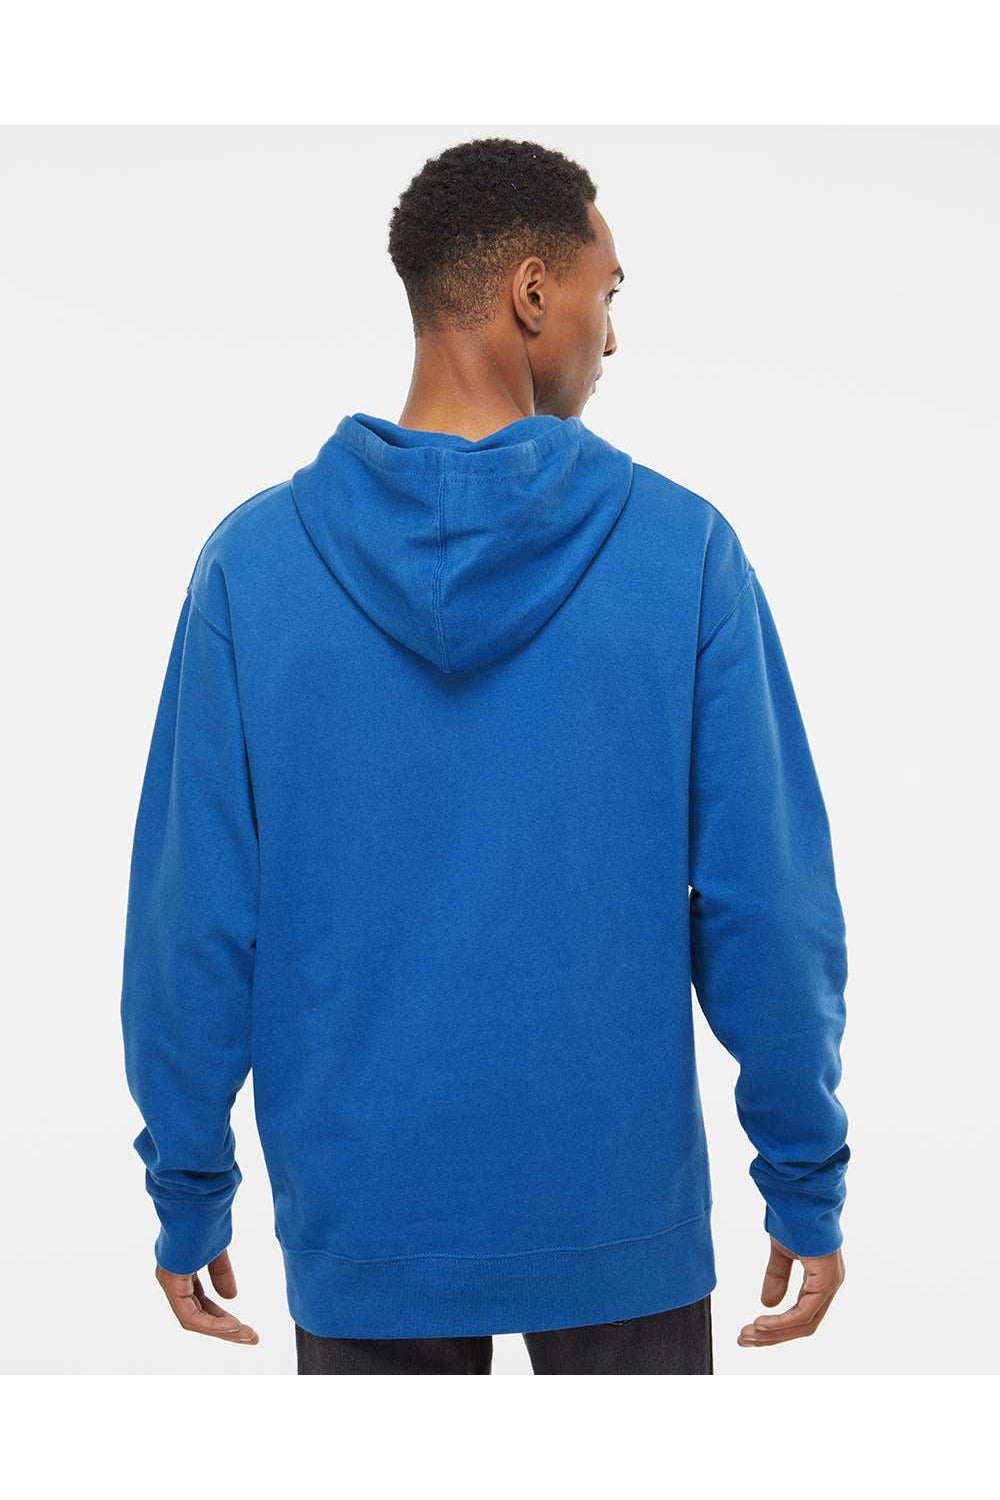 Independent Trading Co. SS4500 Mens Hooded Sweatshirt Hoodie Royal Blue Model Back